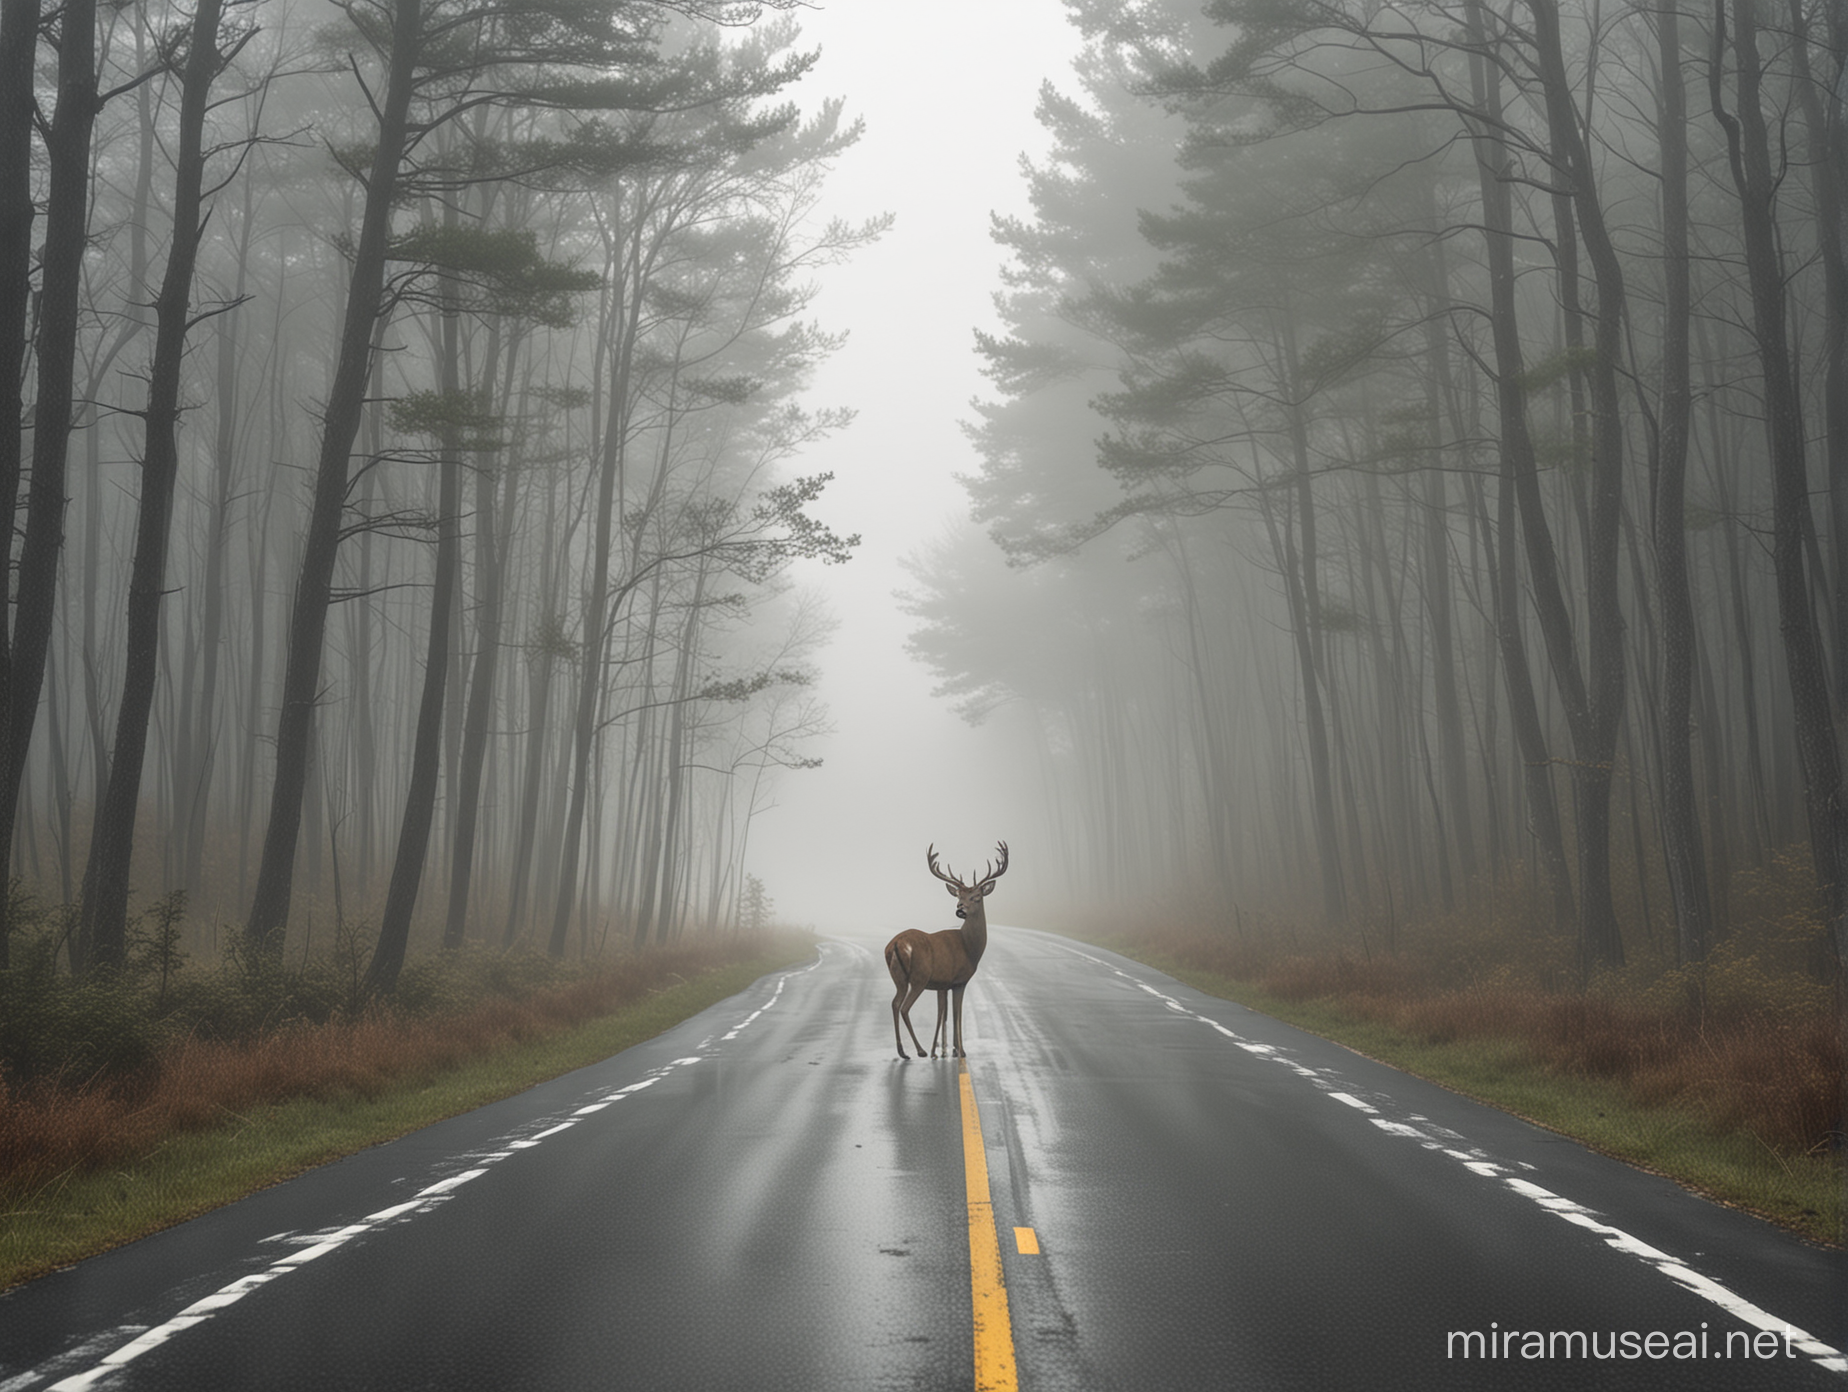 Misty Forest Highway Scene with Majestic Deer